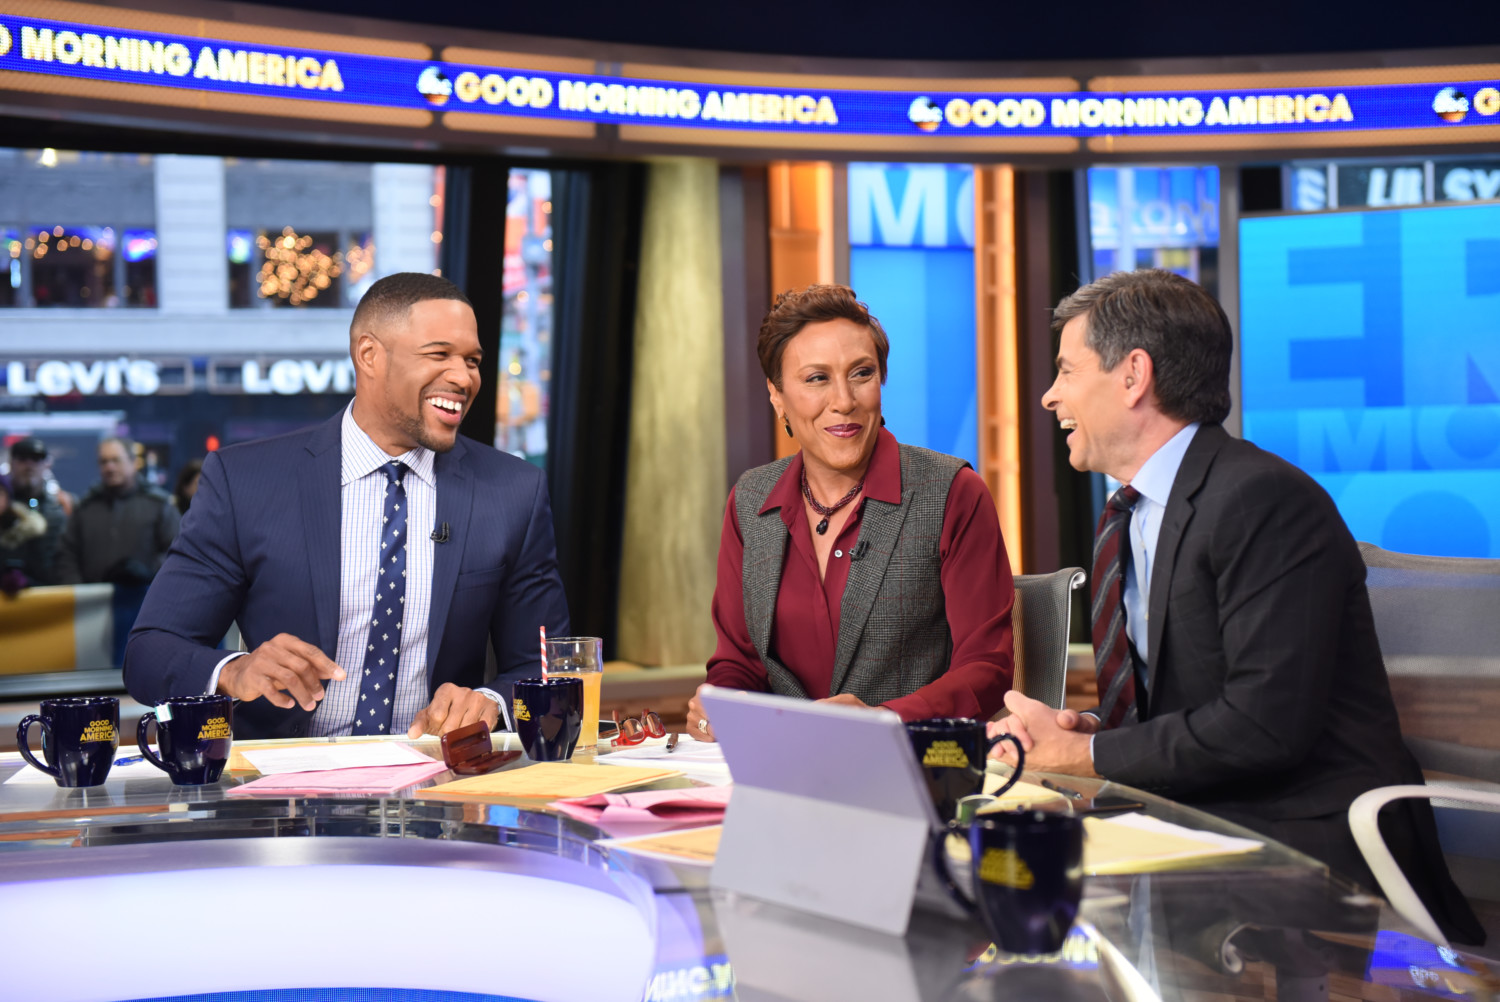 MICHAEL STRAHAN, ROBIN ROBERTS and GEORGE STEPHANOPOULOS on set of Good Morning America